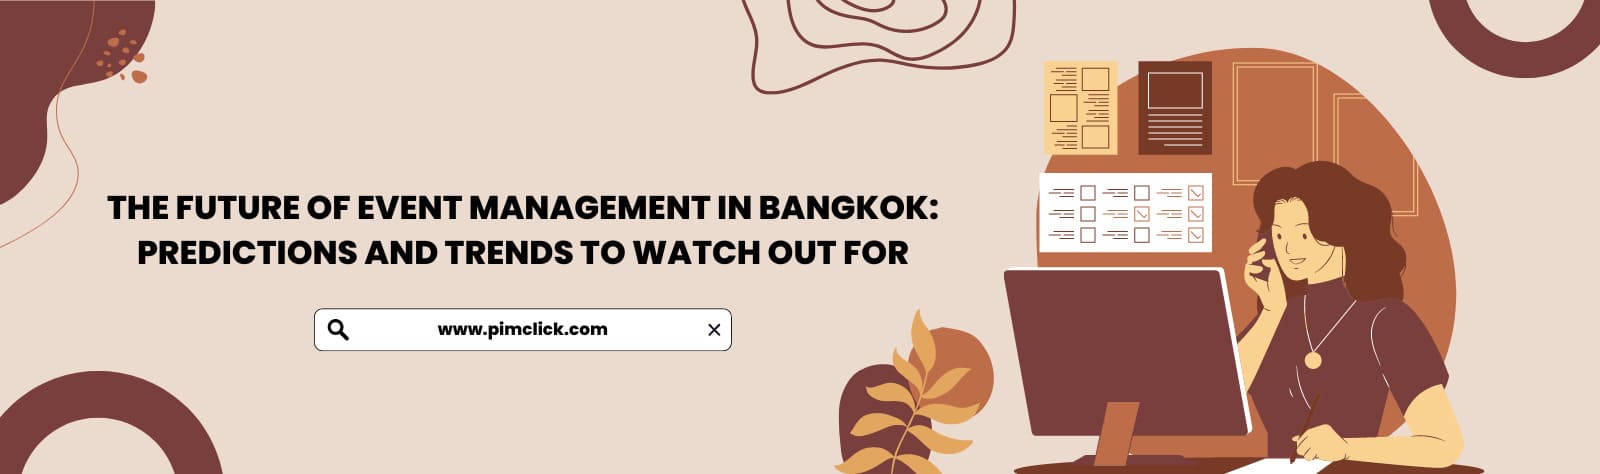 The Future of Event Management in Bangkok: Predictions and Trends to Watch Out For